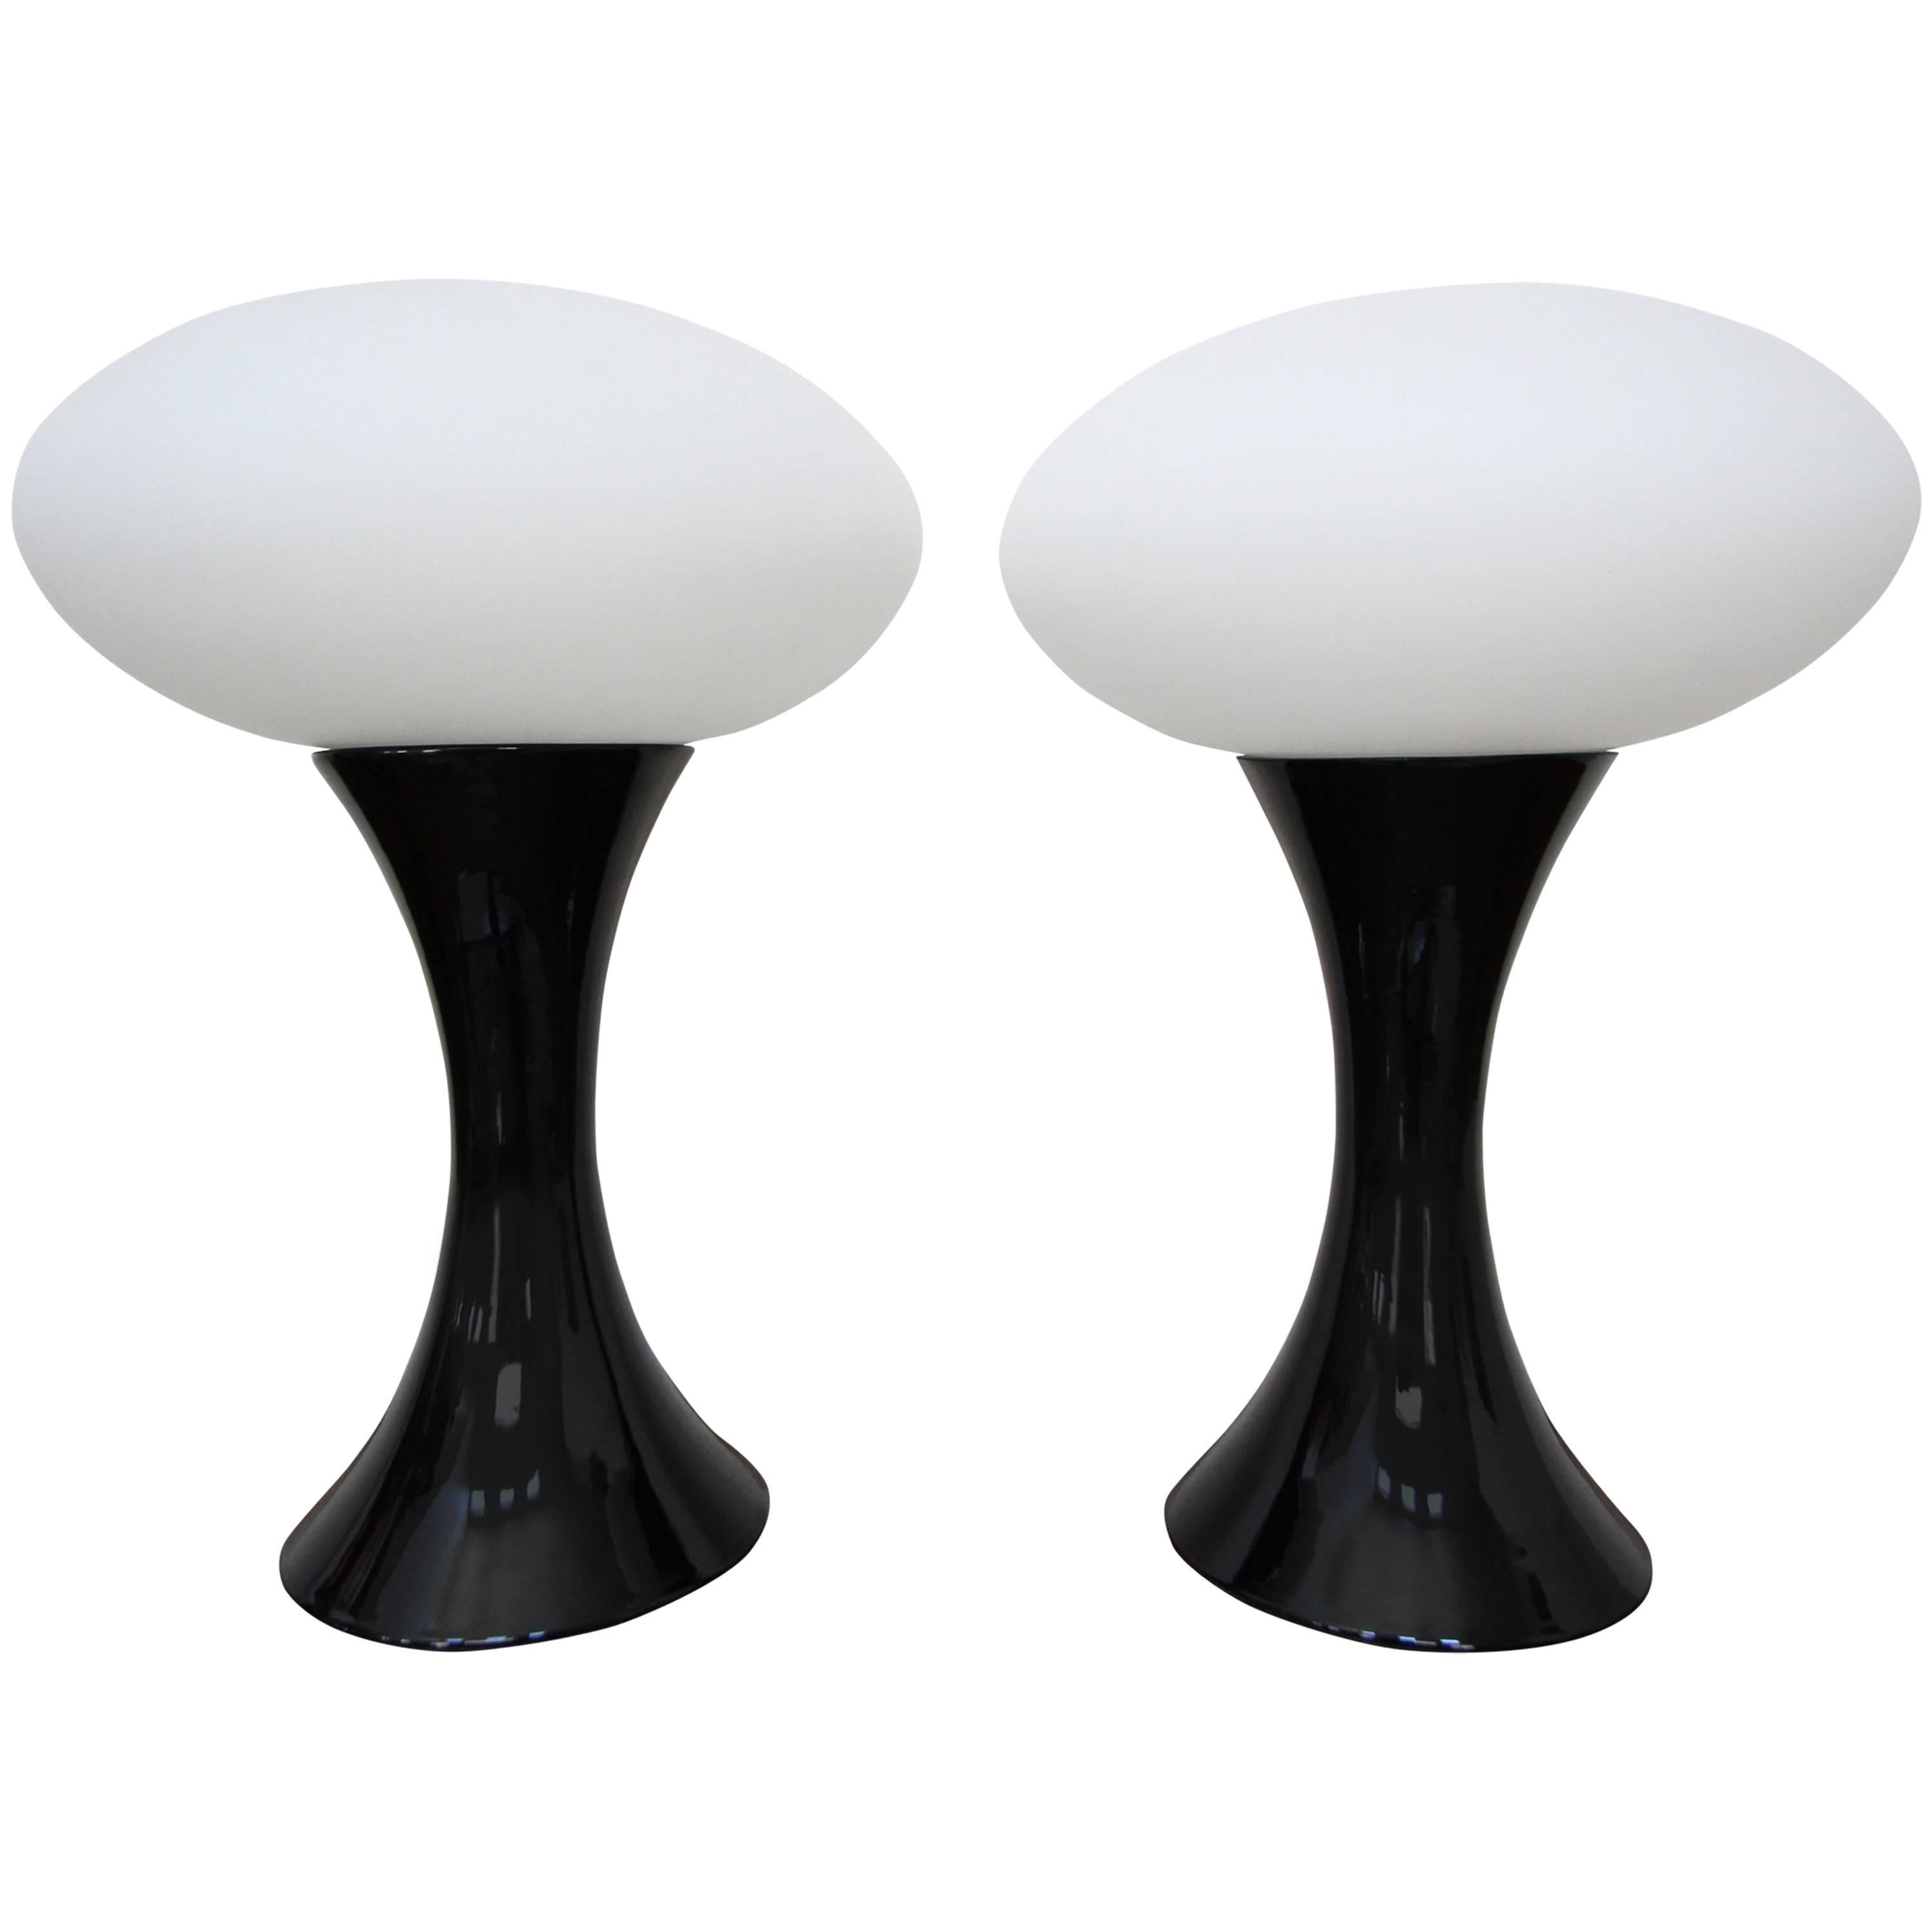 This is a perfect pair of Italian ceramic and porcelain table lamps. Finished in a high gloss and topped with a Classic Laurel Lamp Company style shade, these beauties are real show stoppers.

Dimensions:
Overall 20.25